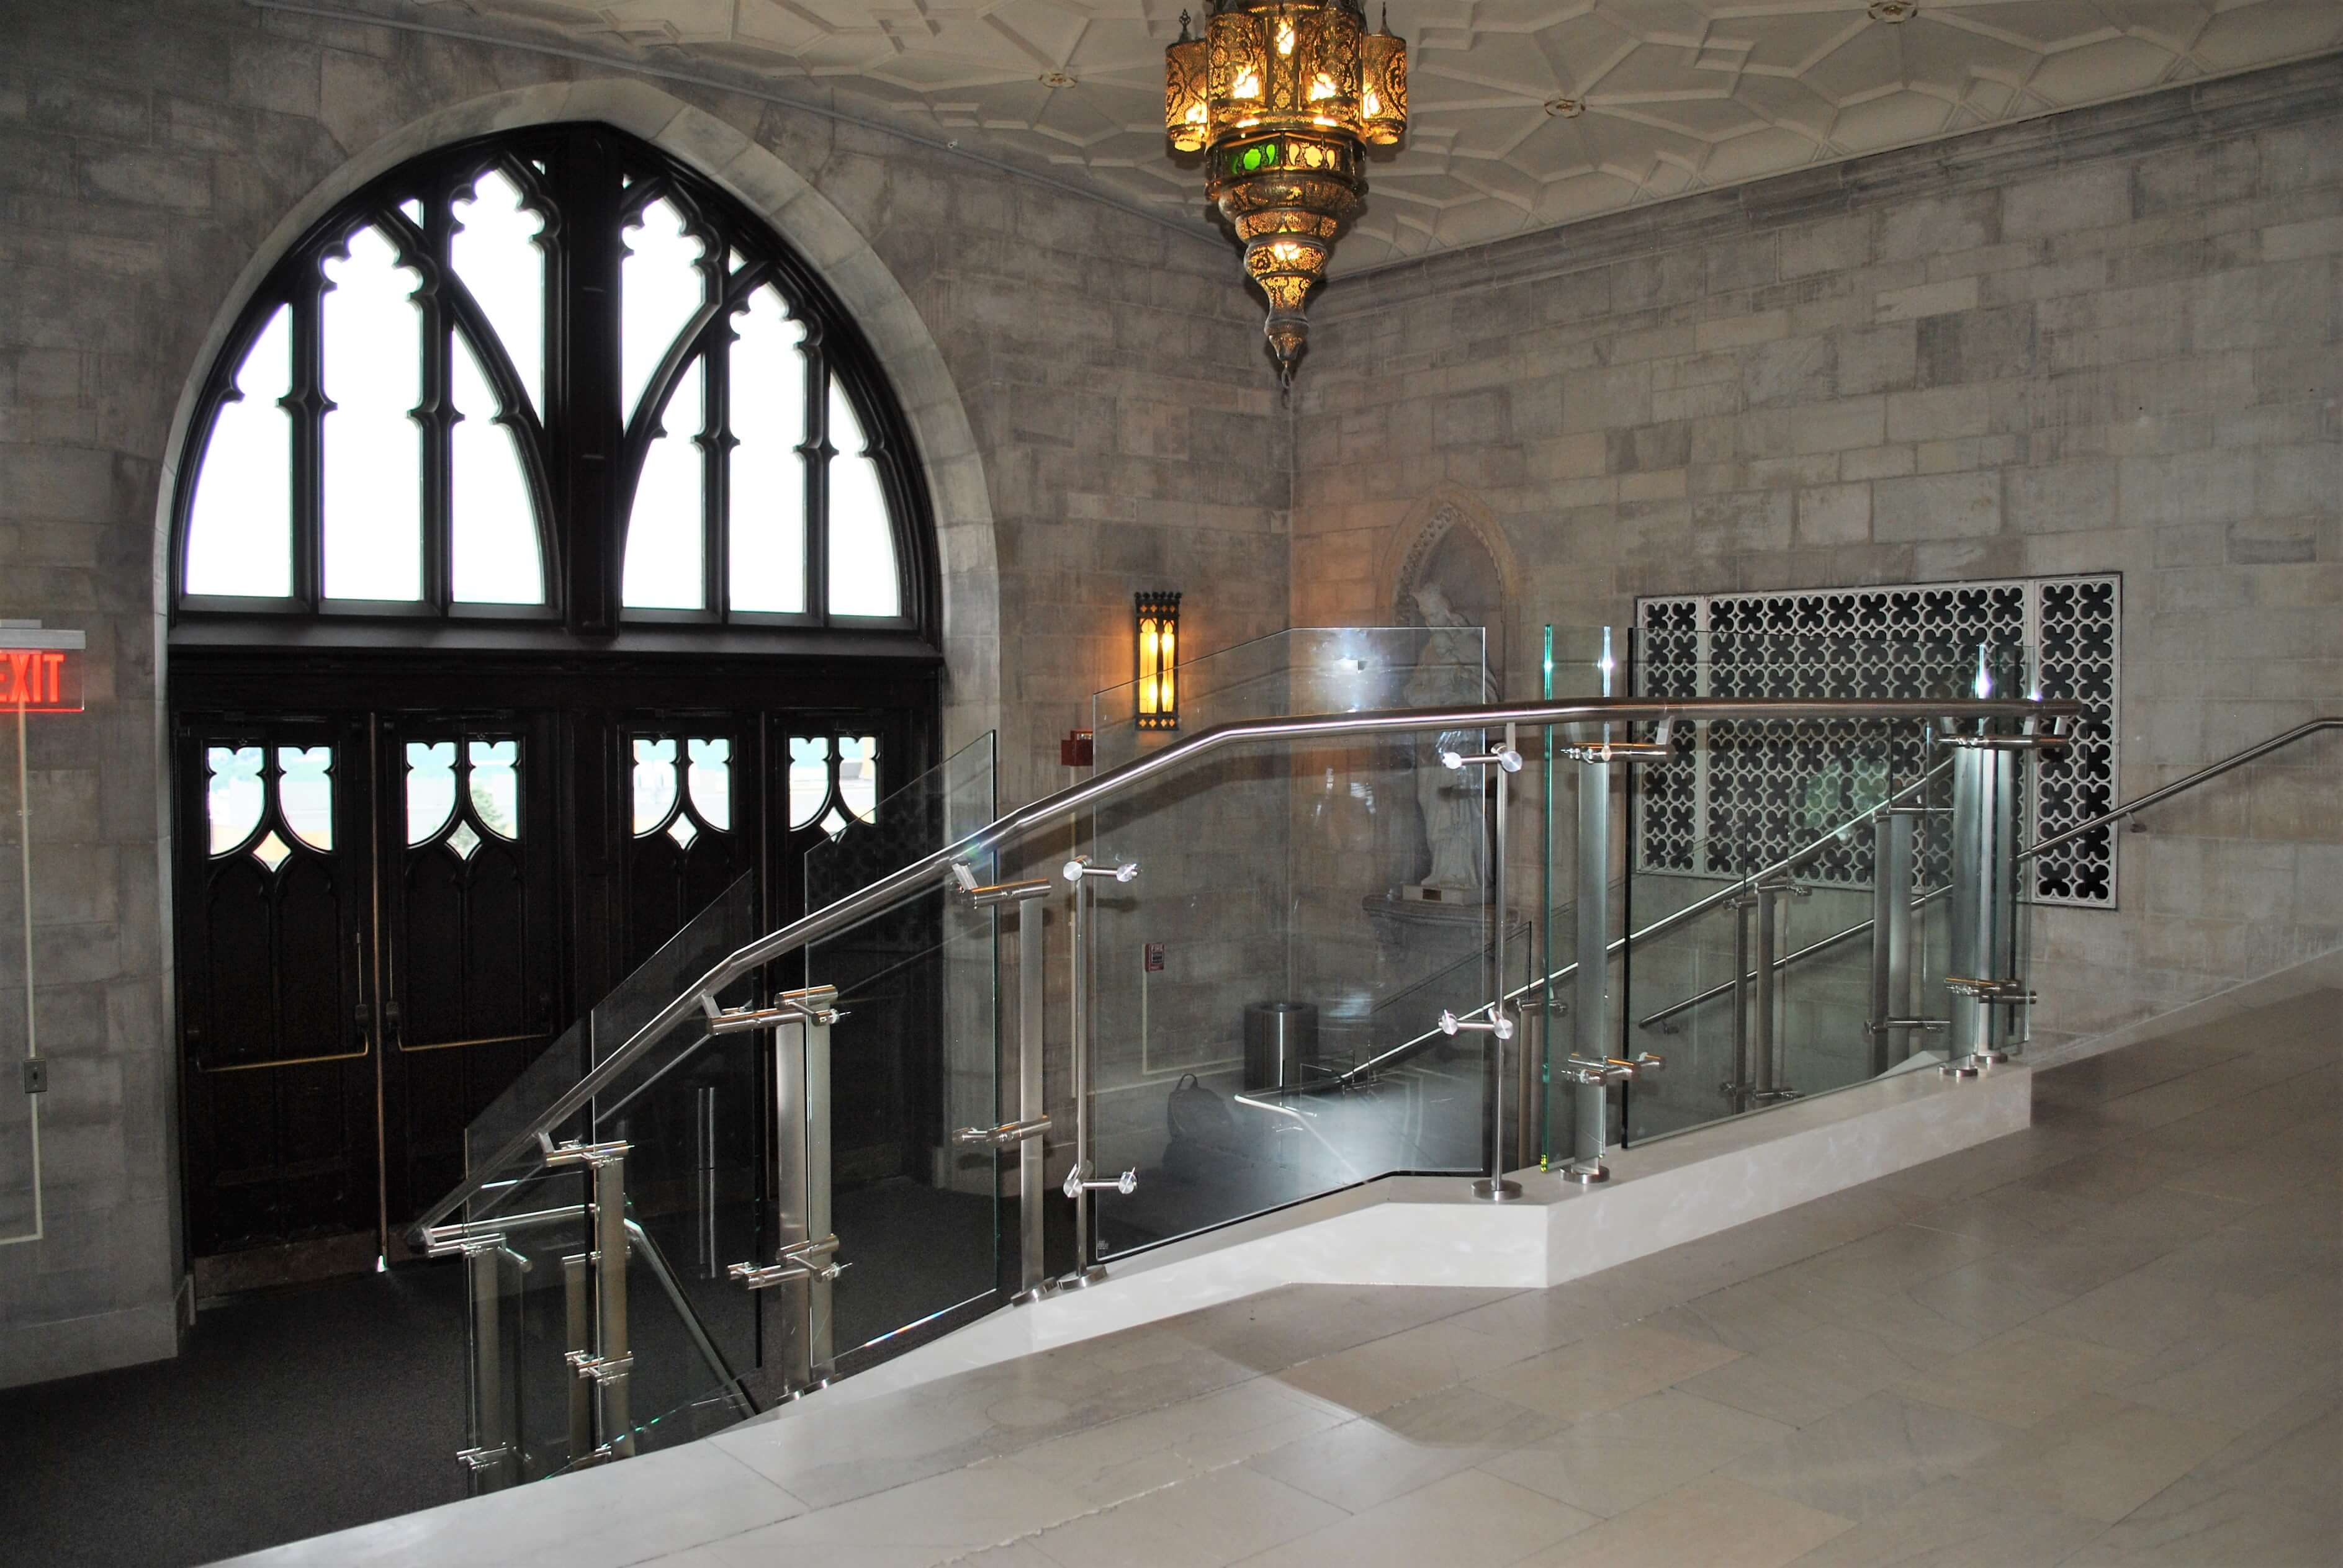 Stairwell view of Konic guardrail installation with glass infill at Mount Saint Mary's, NY.